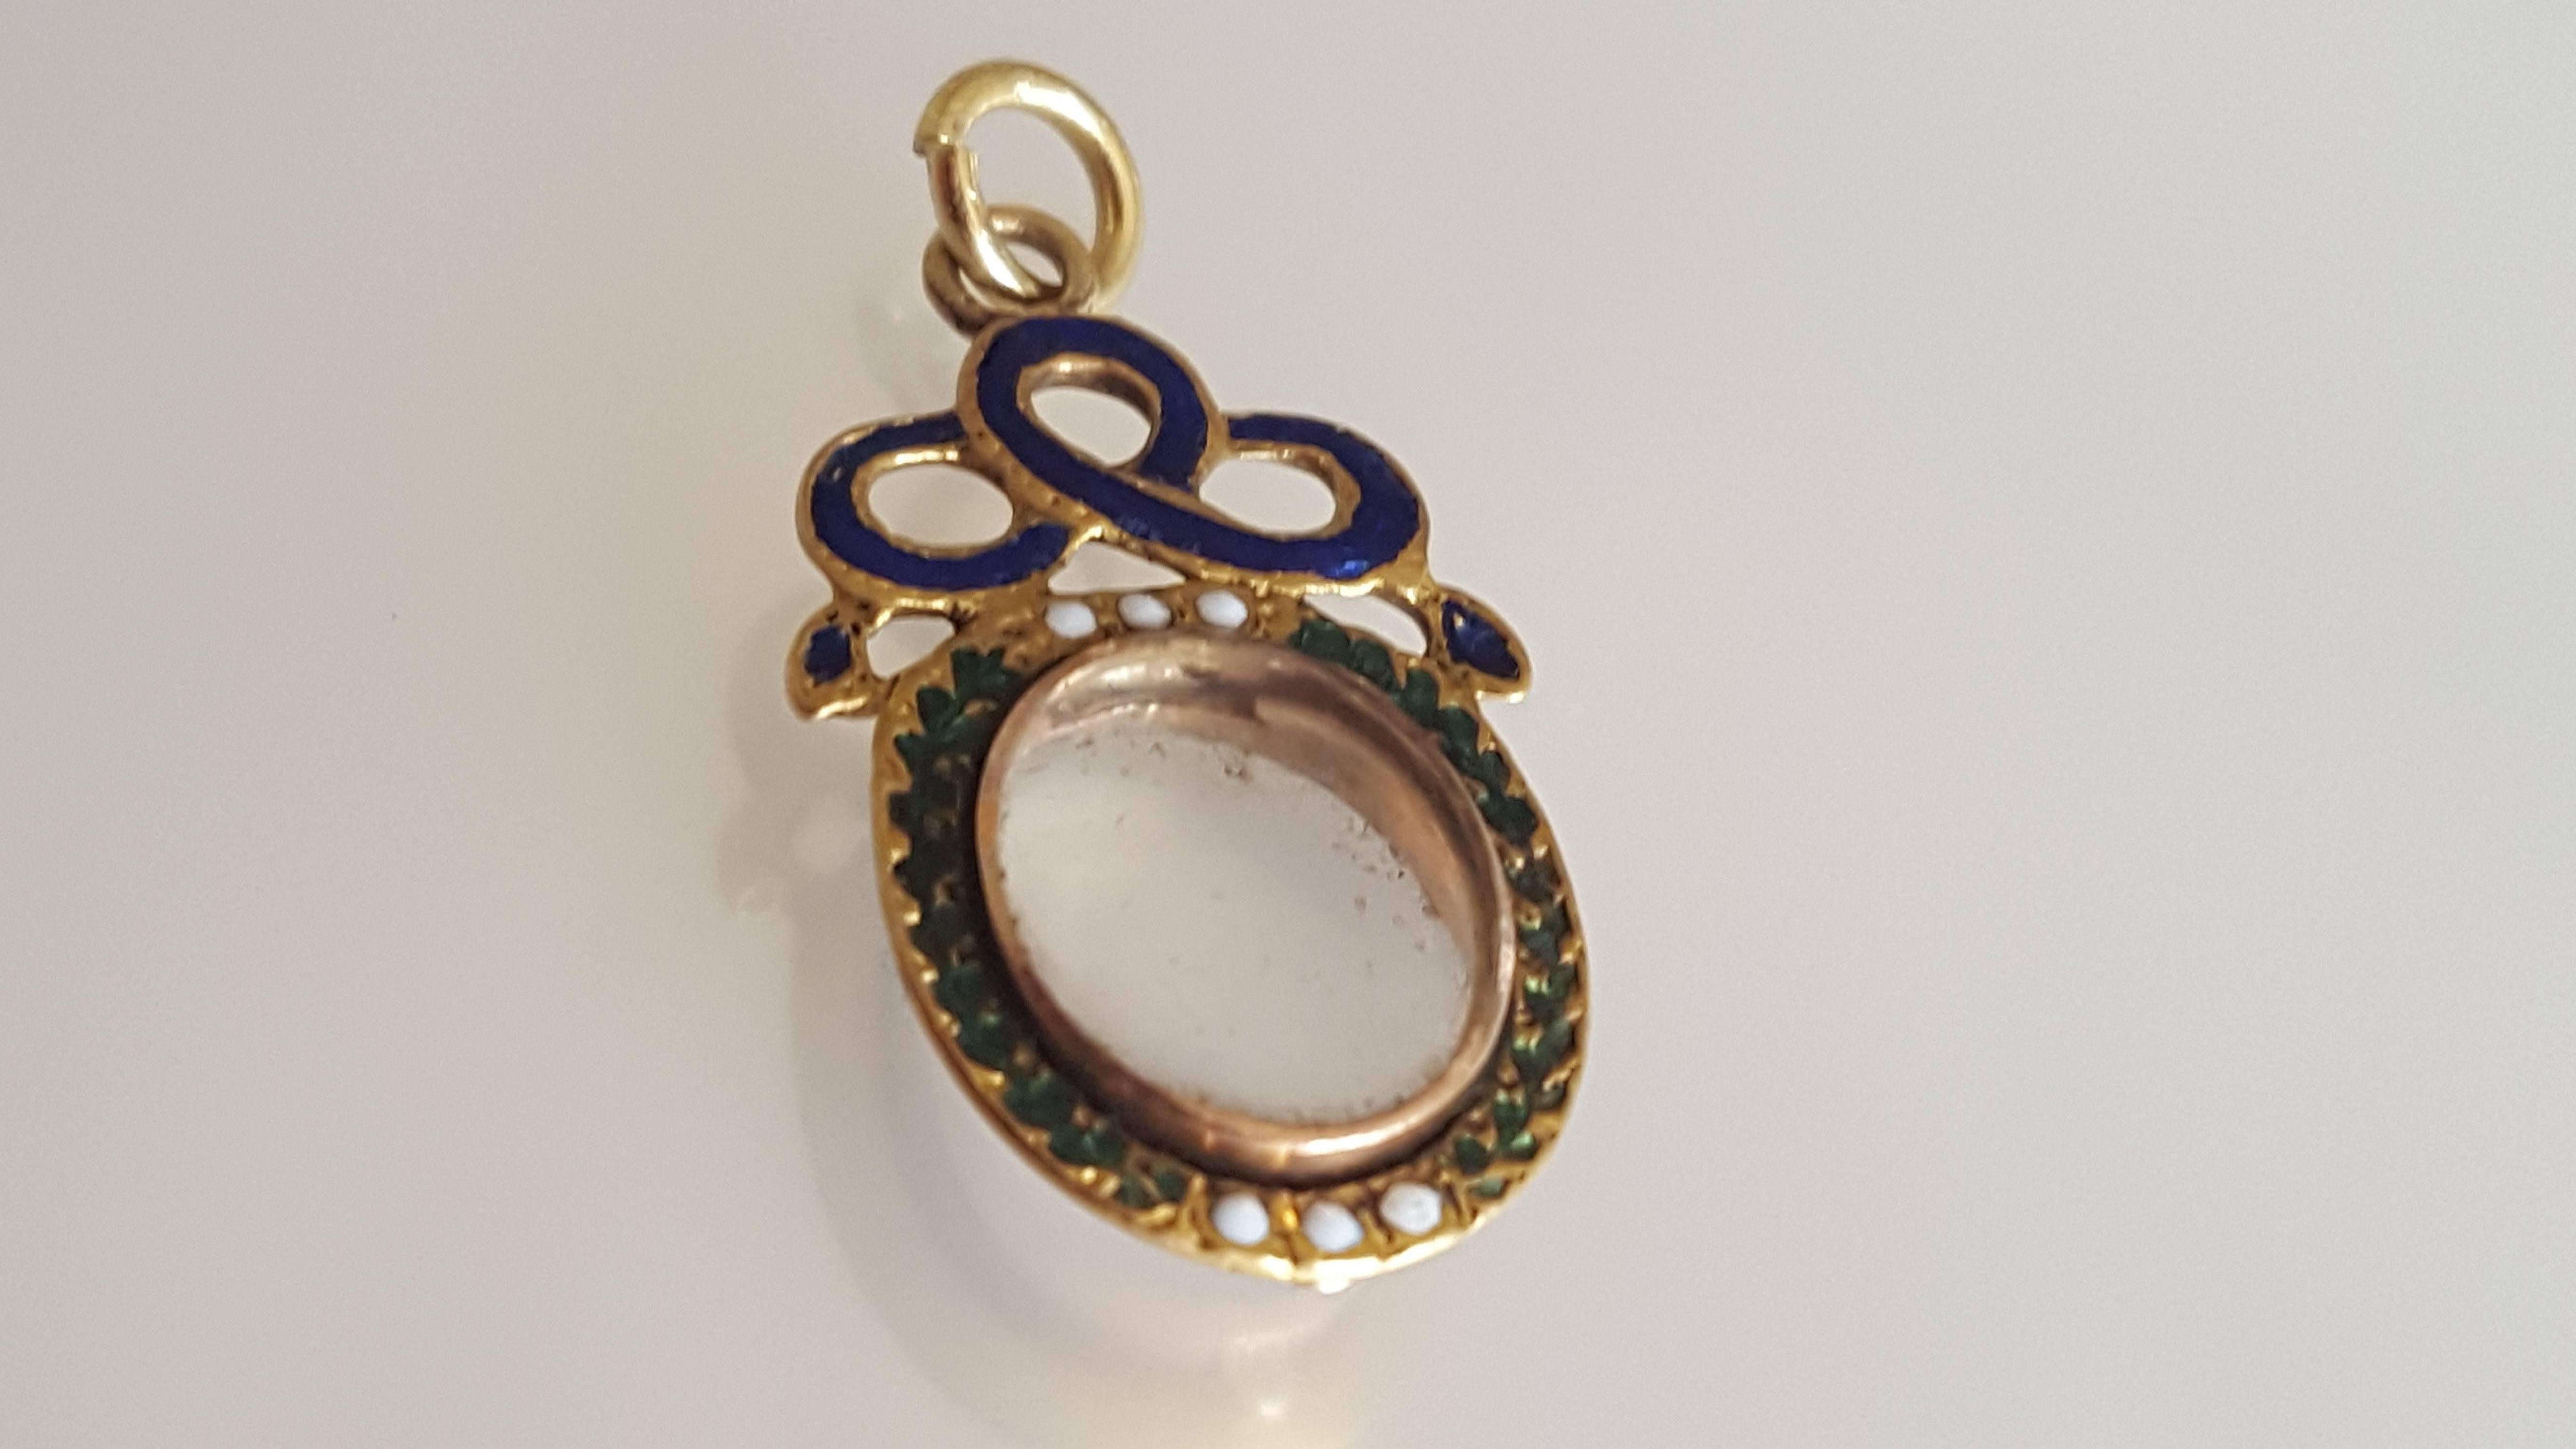 A Rare Georgian c.1700s 18 Carat Gold  and blue/green/white enameled locket pendant. English origin. 
Total drop including jump rings 25mm or 1